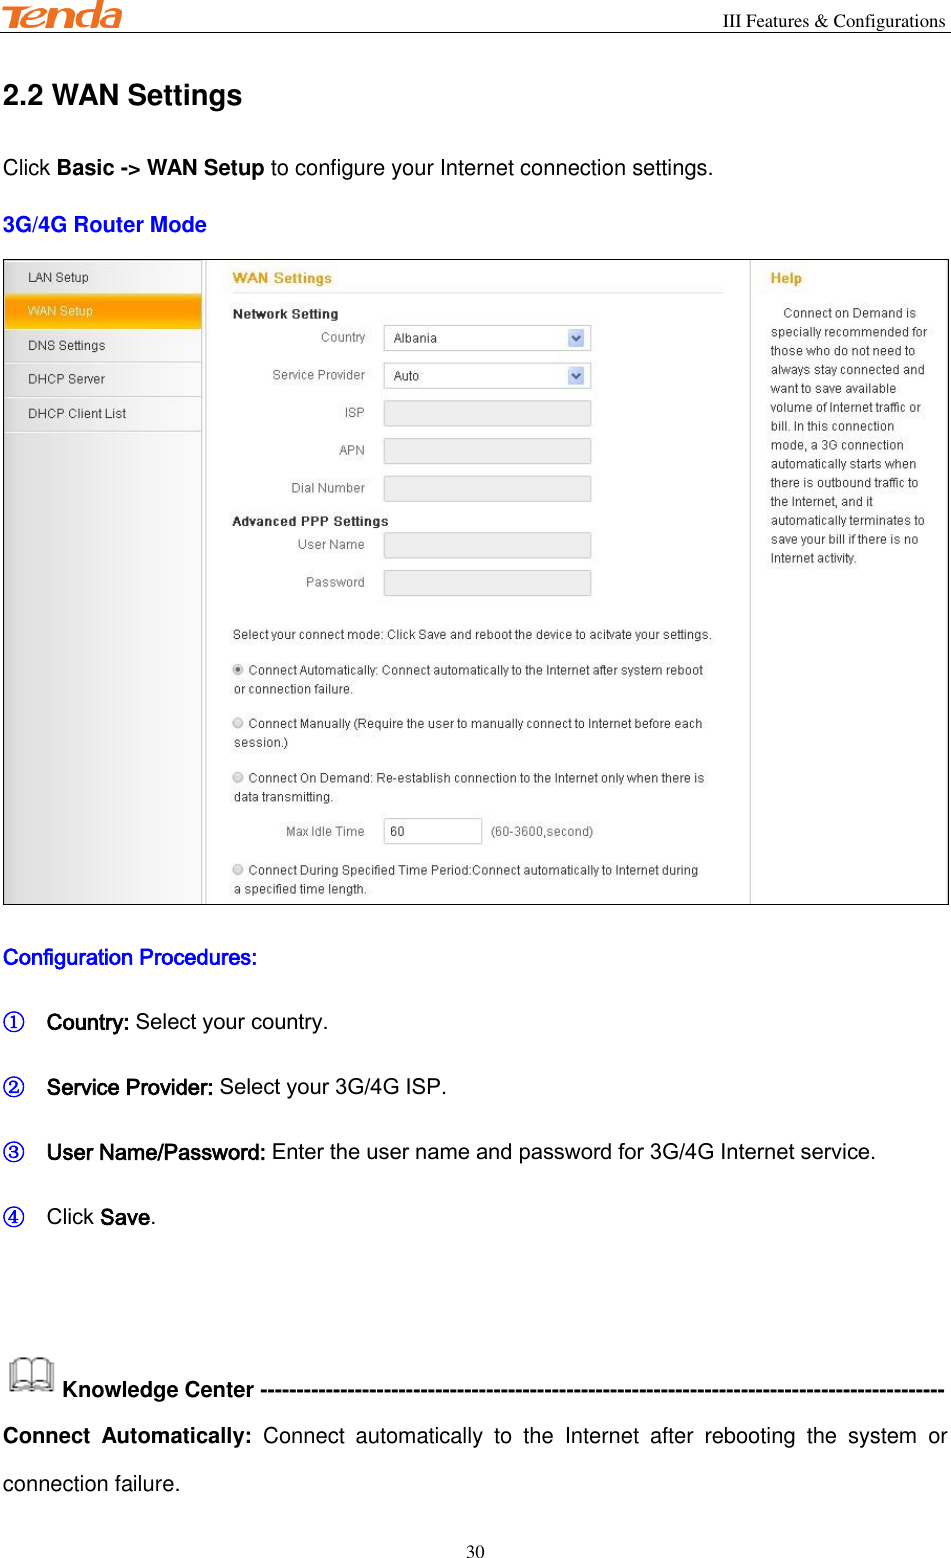                                                        III Features &amp; Configurations           30 2.2 WAN Settings Click Basic -&gt; WAN Setup to configure your Internet connection settings.   3G/4G Router Mode  Configuration Procedures: ① Country: Select your country. ② Service Provider: Select your 3G/4G ISP. ③ User Name/Password: Enter the user name and password for 3G/4G Internet service. ④ Click Save.   Knowledge Center ---------------------------------------------------------------------------------------------- Connect  Automatically:  Connect  automatically  to  the  Internet  after  rebooting  the  system  or connection failure. 